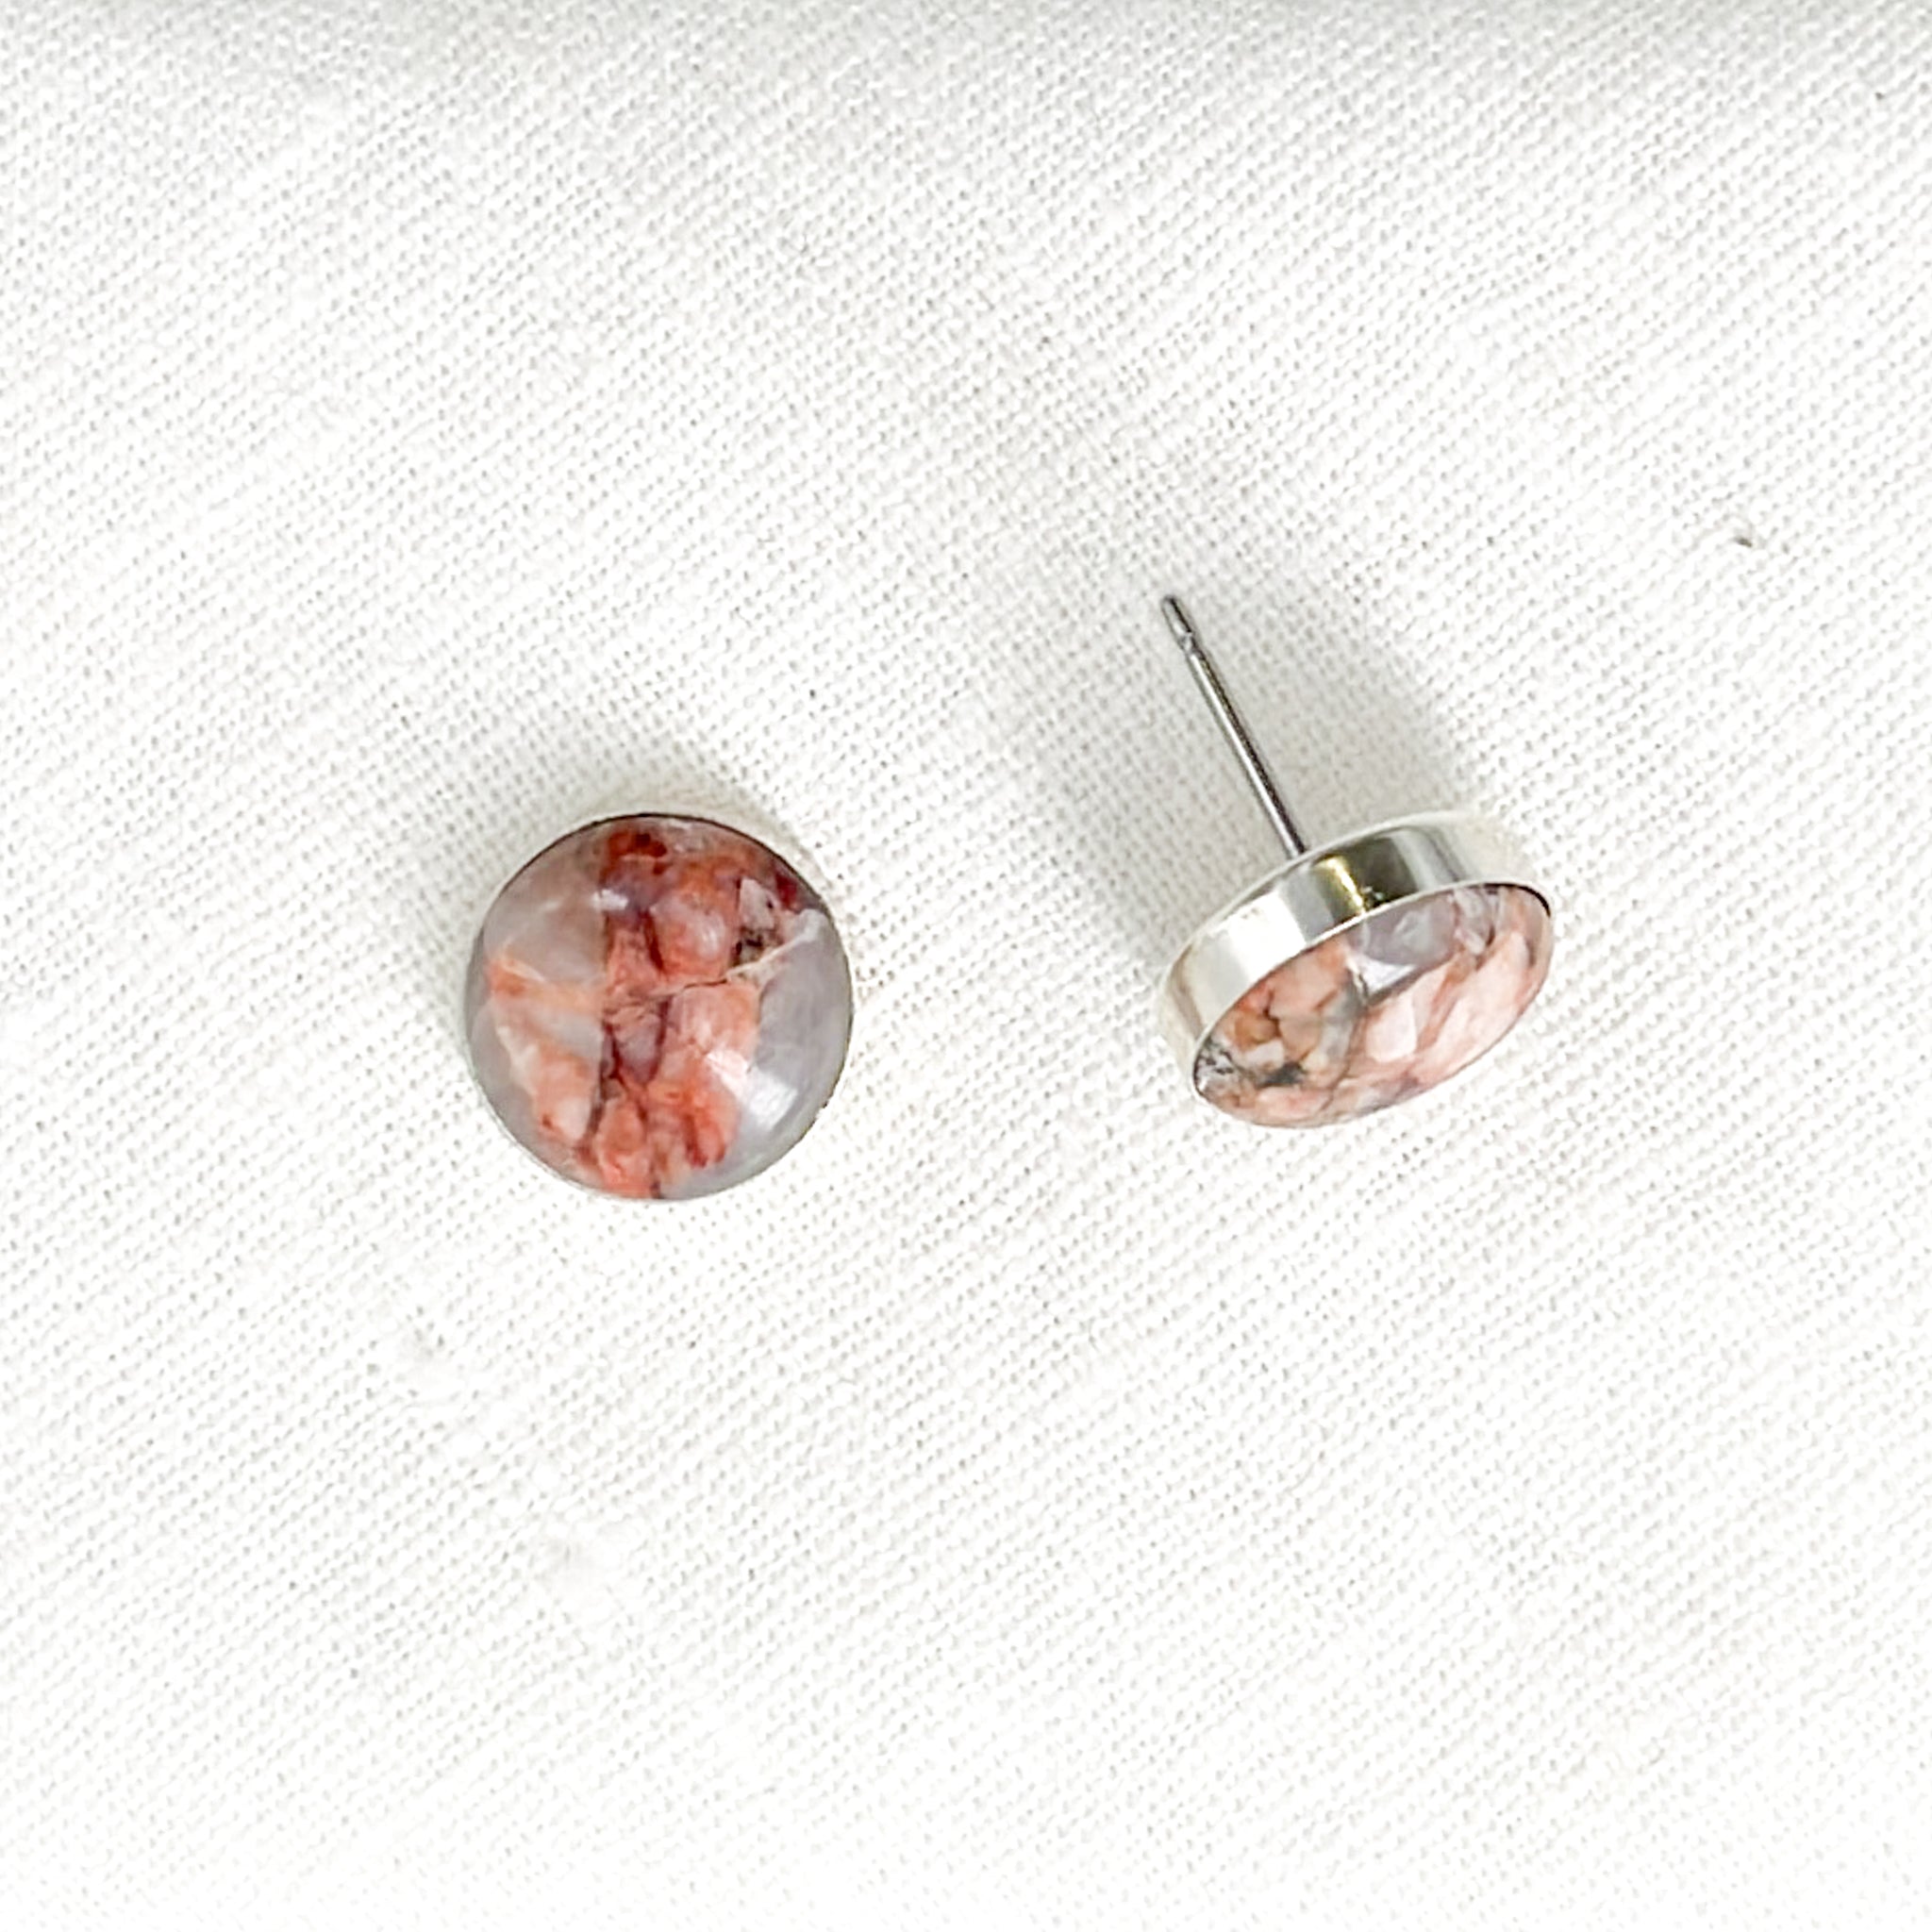 Medium Confluence Stud Earrings with 10mm granite with pink feldspar, collected in Lakewood,Colorado